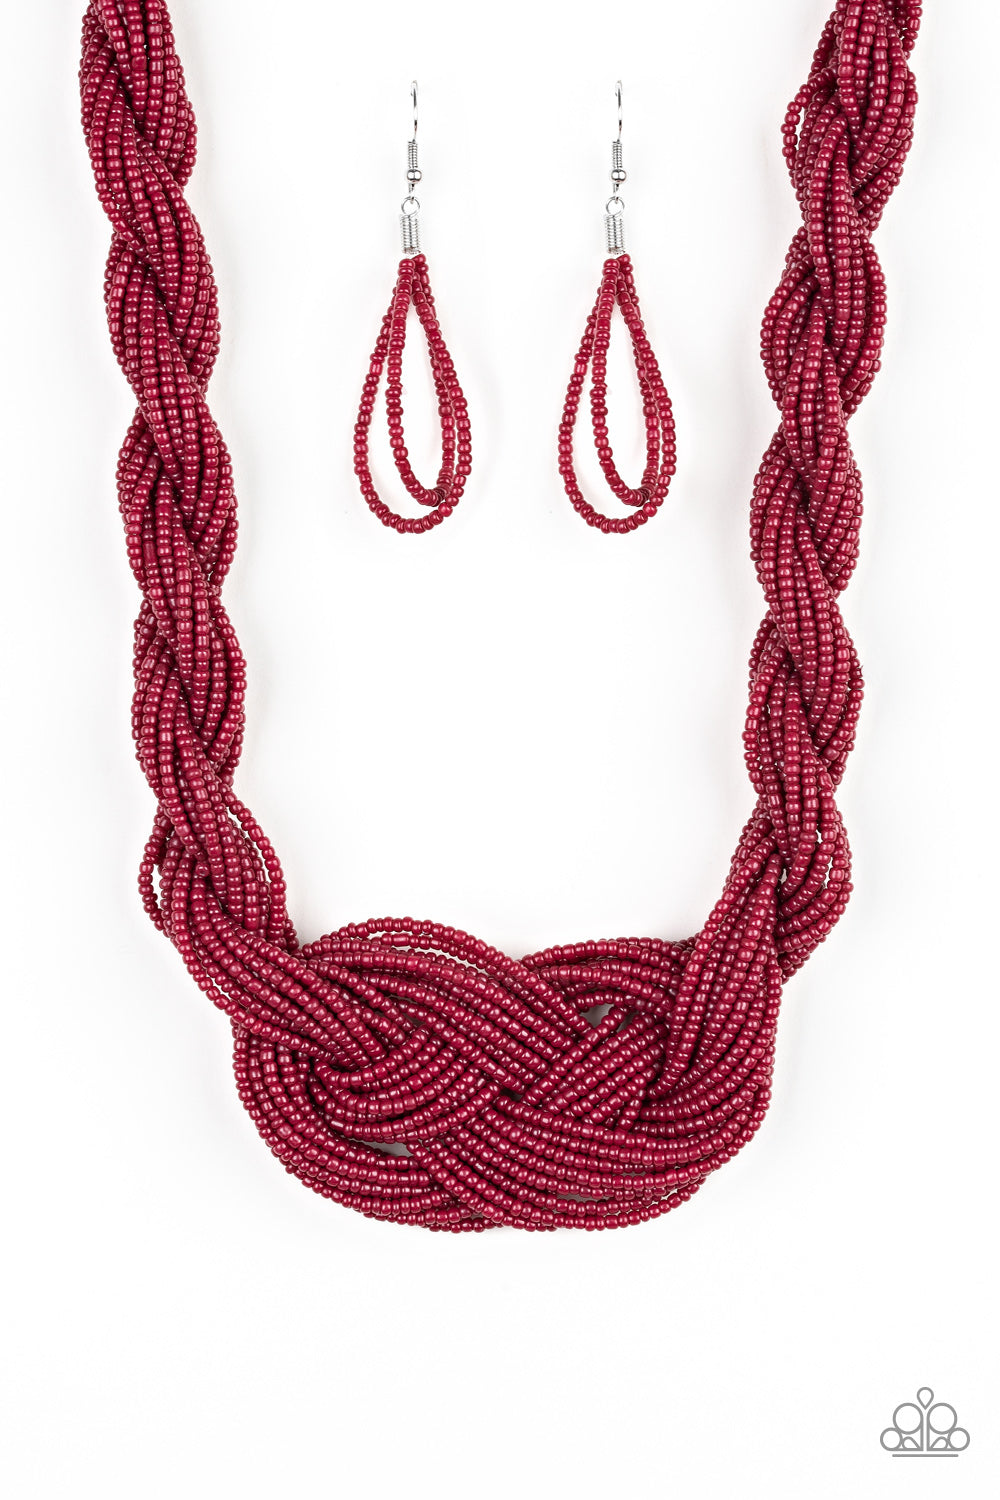 A Standing Ovation Red Paparazzi Necklaces Cashmere Pink Jewels - Cashmere Pink Jewels & Accessories, Cashmere Pink Jewels & Accessories - Paparazzi